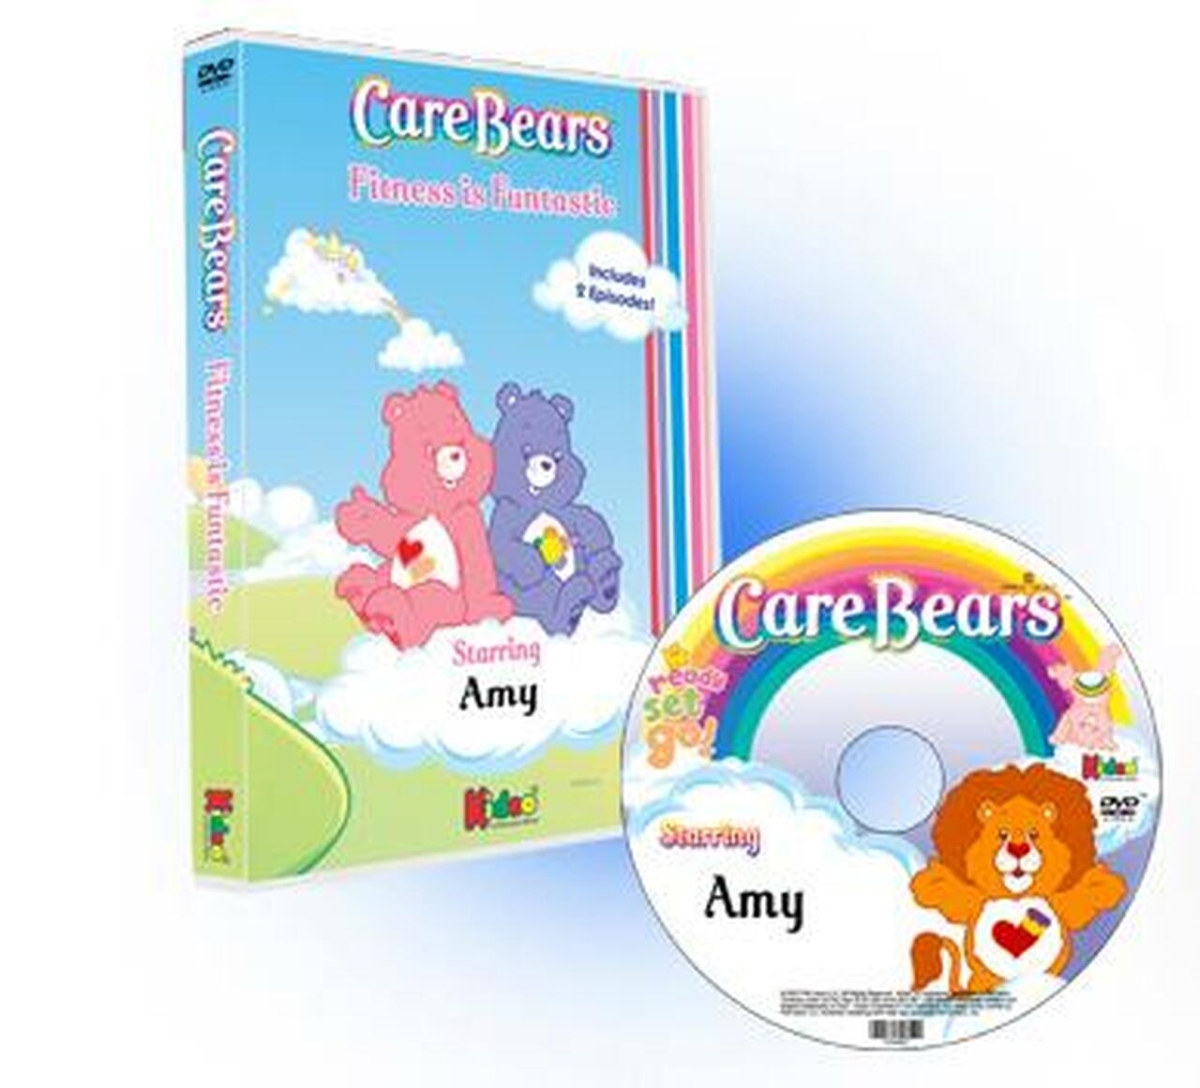 Picture of Mediak 10060 Care Bears Fitness is Funtastic Personalized Kids Photo DVD